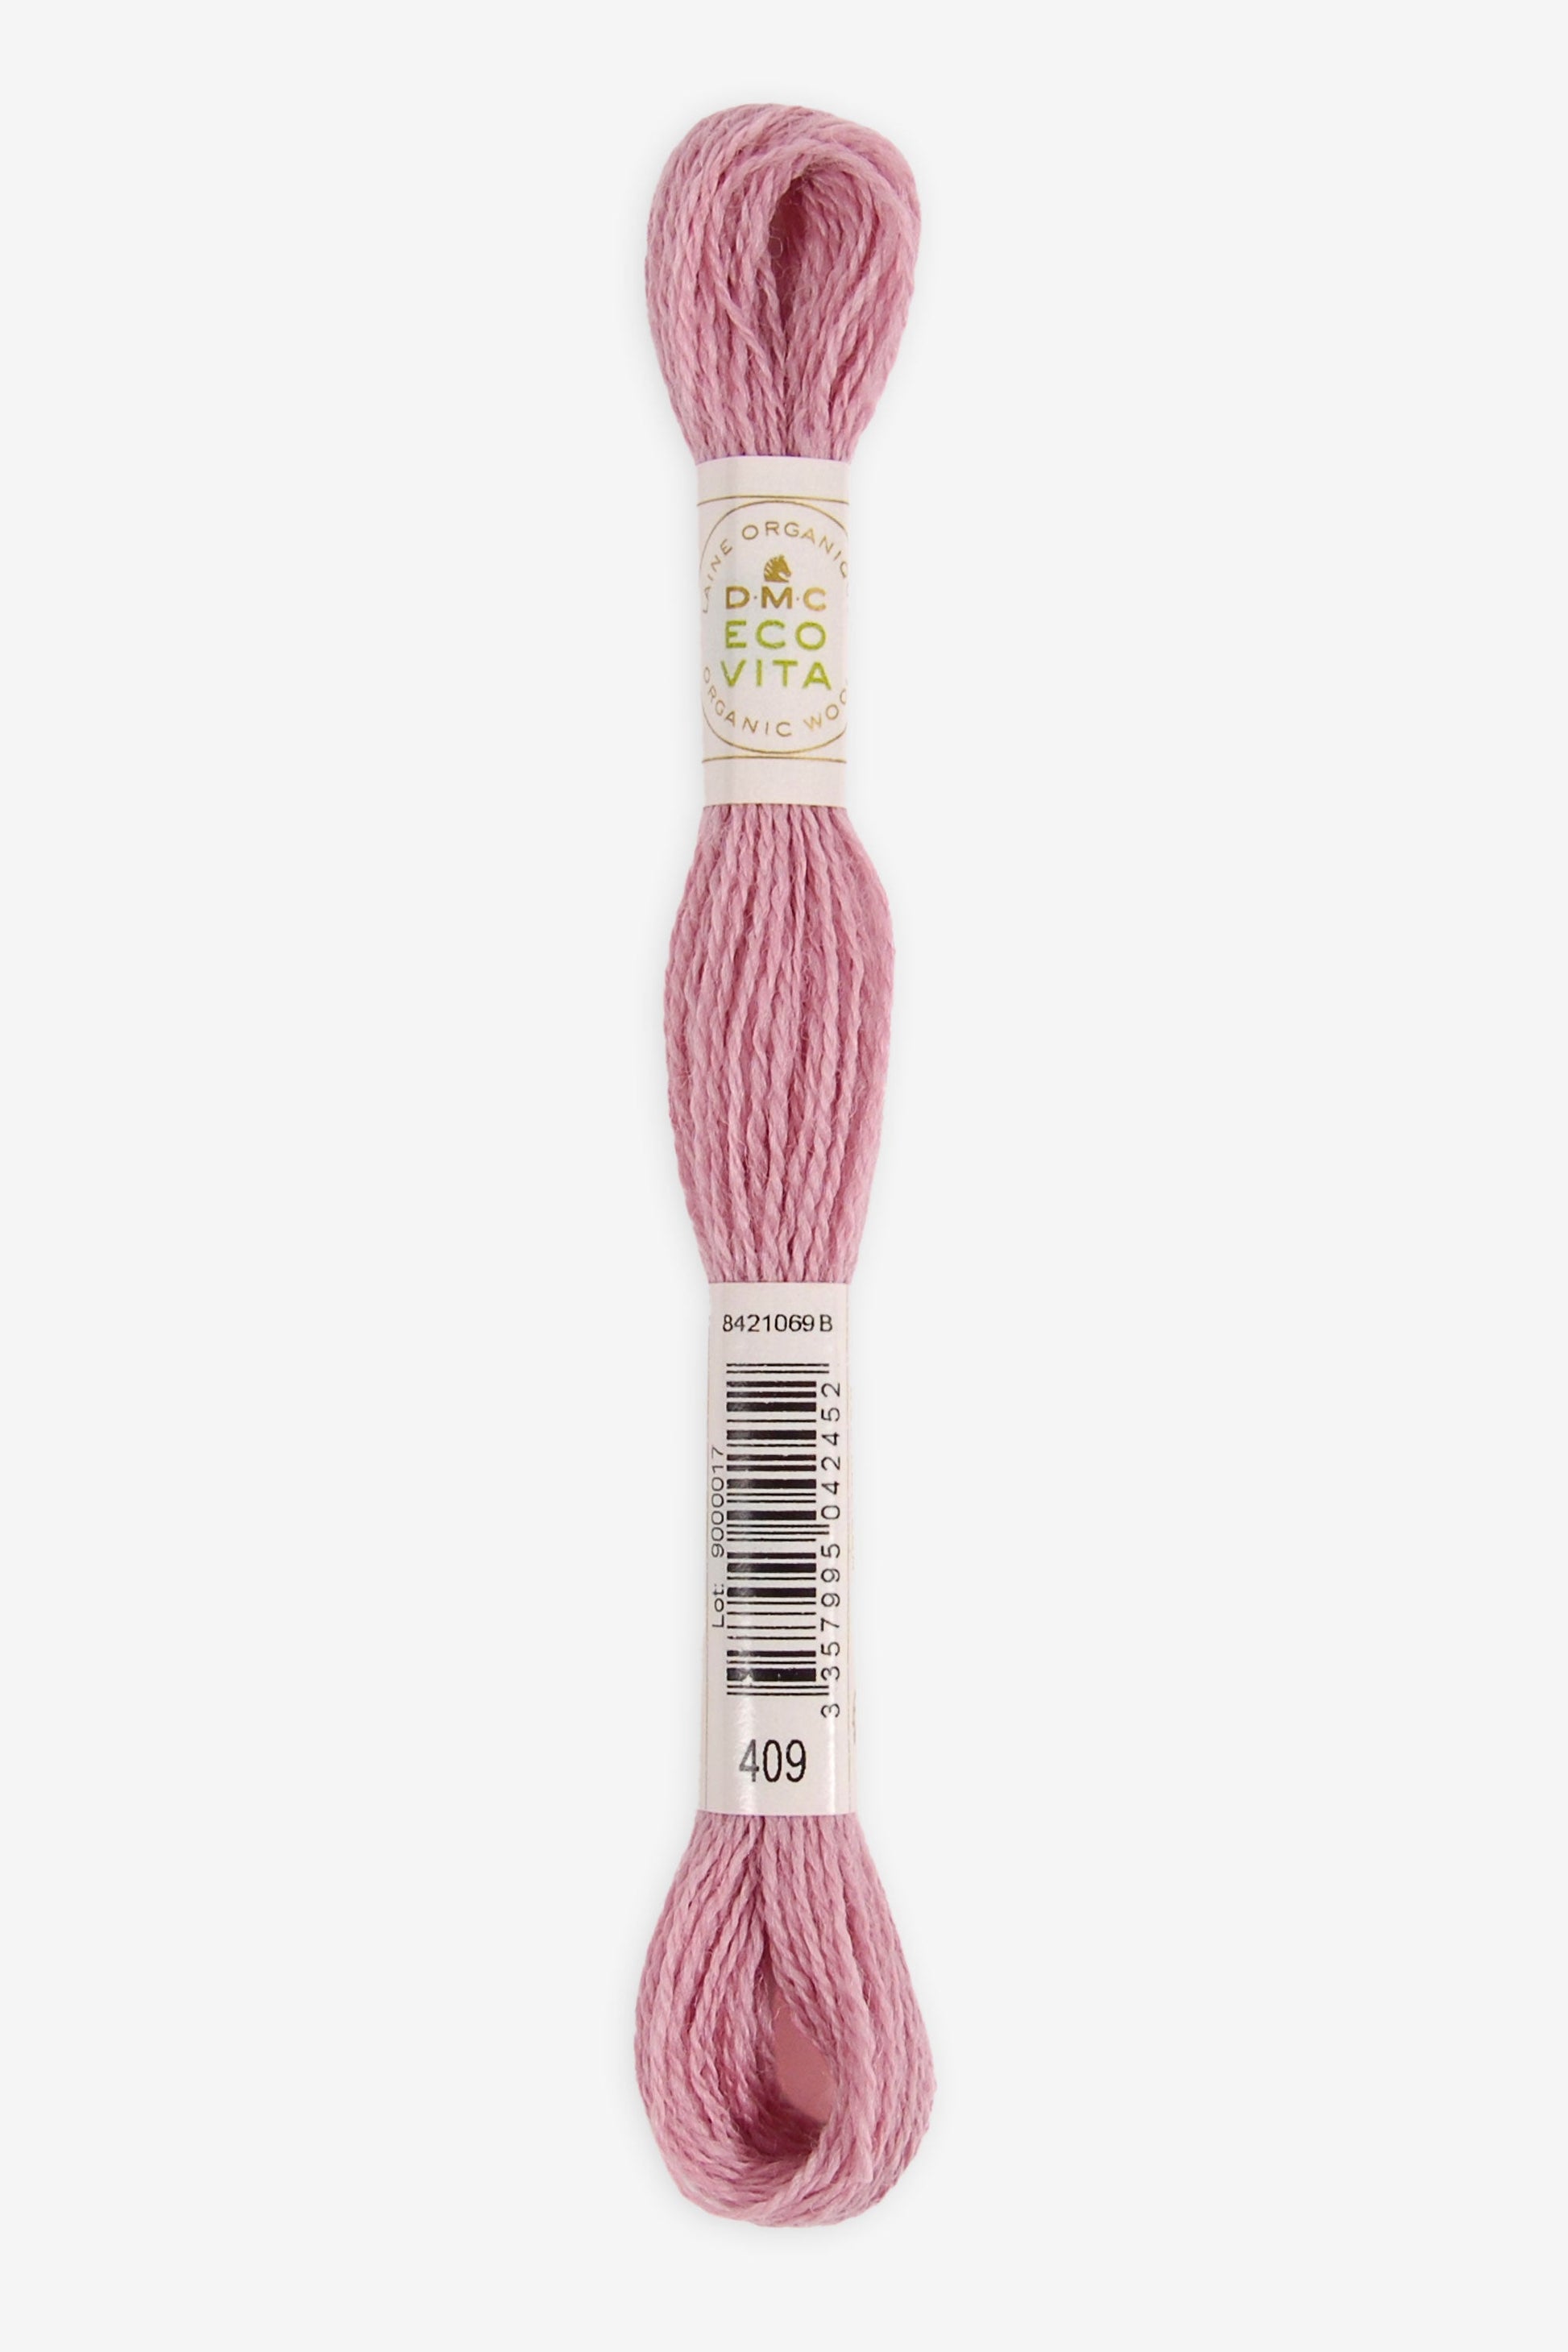 Single skein of Eco Vita Crewel Wool thread from DMC in color #409 against a white background